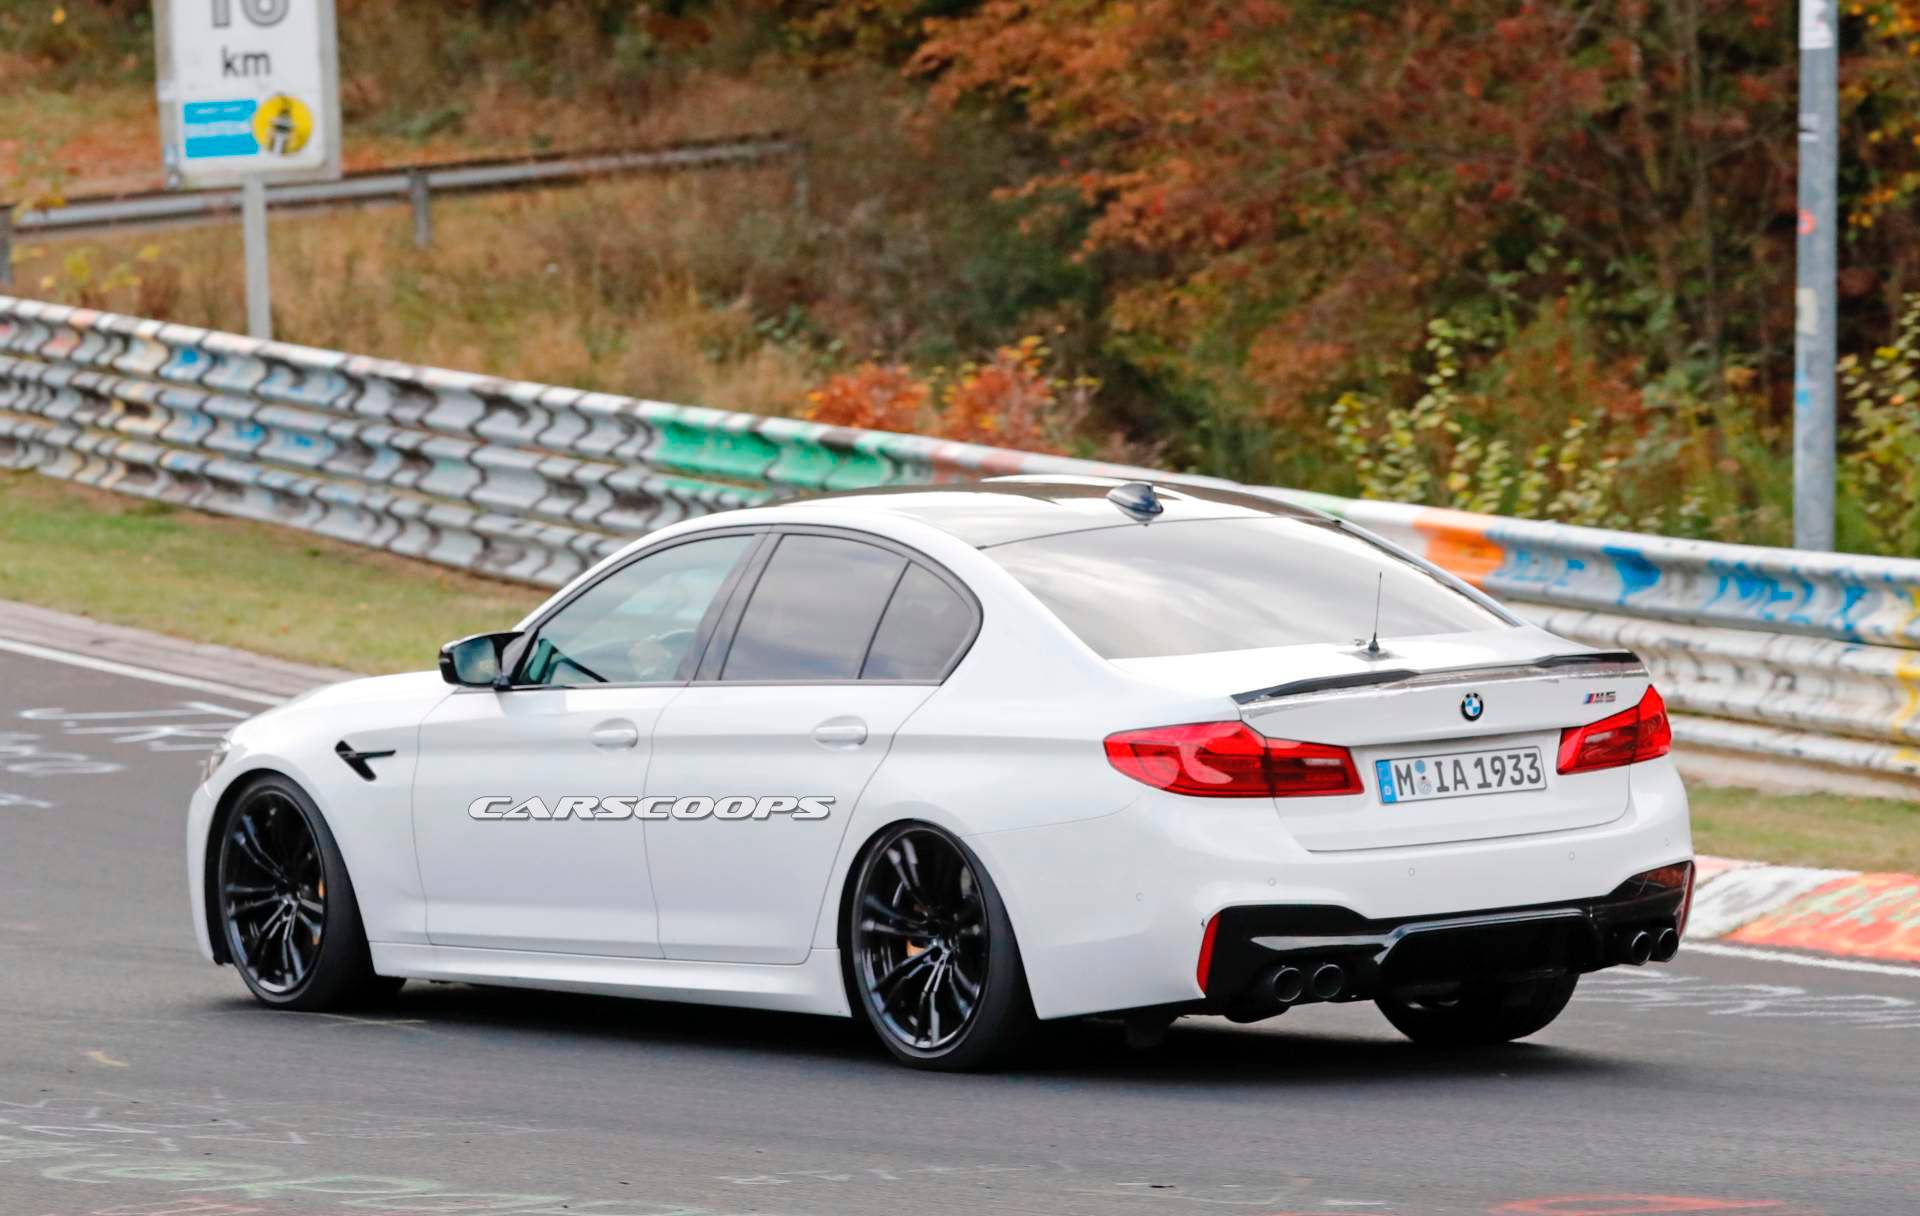 Бмв м5 цс. BMW m5 CS. BMW m5 GS. BMW m5 CS 2022. БМВ м5 CLS.